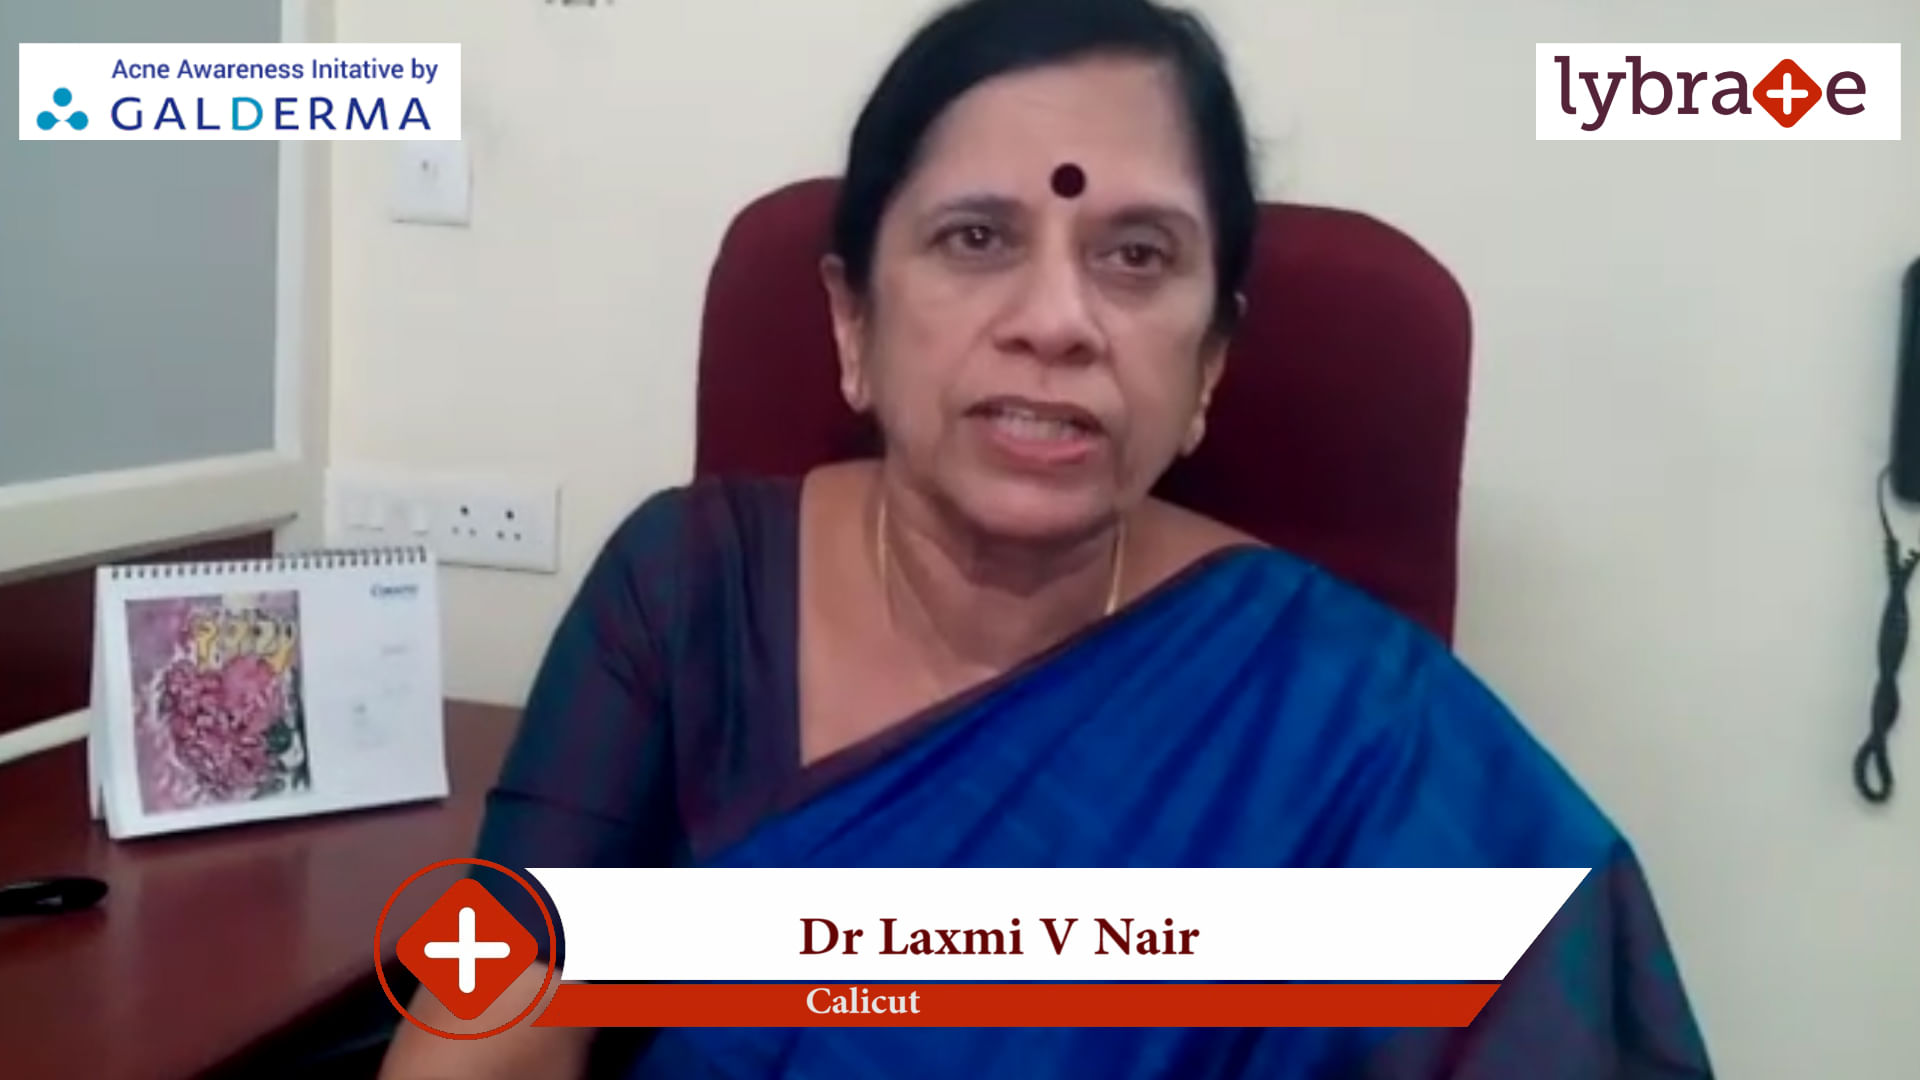 Lybrate | Dr. Laxmi V Nair speaks on IMPORTANCE OF TREATING ACNE EARLY